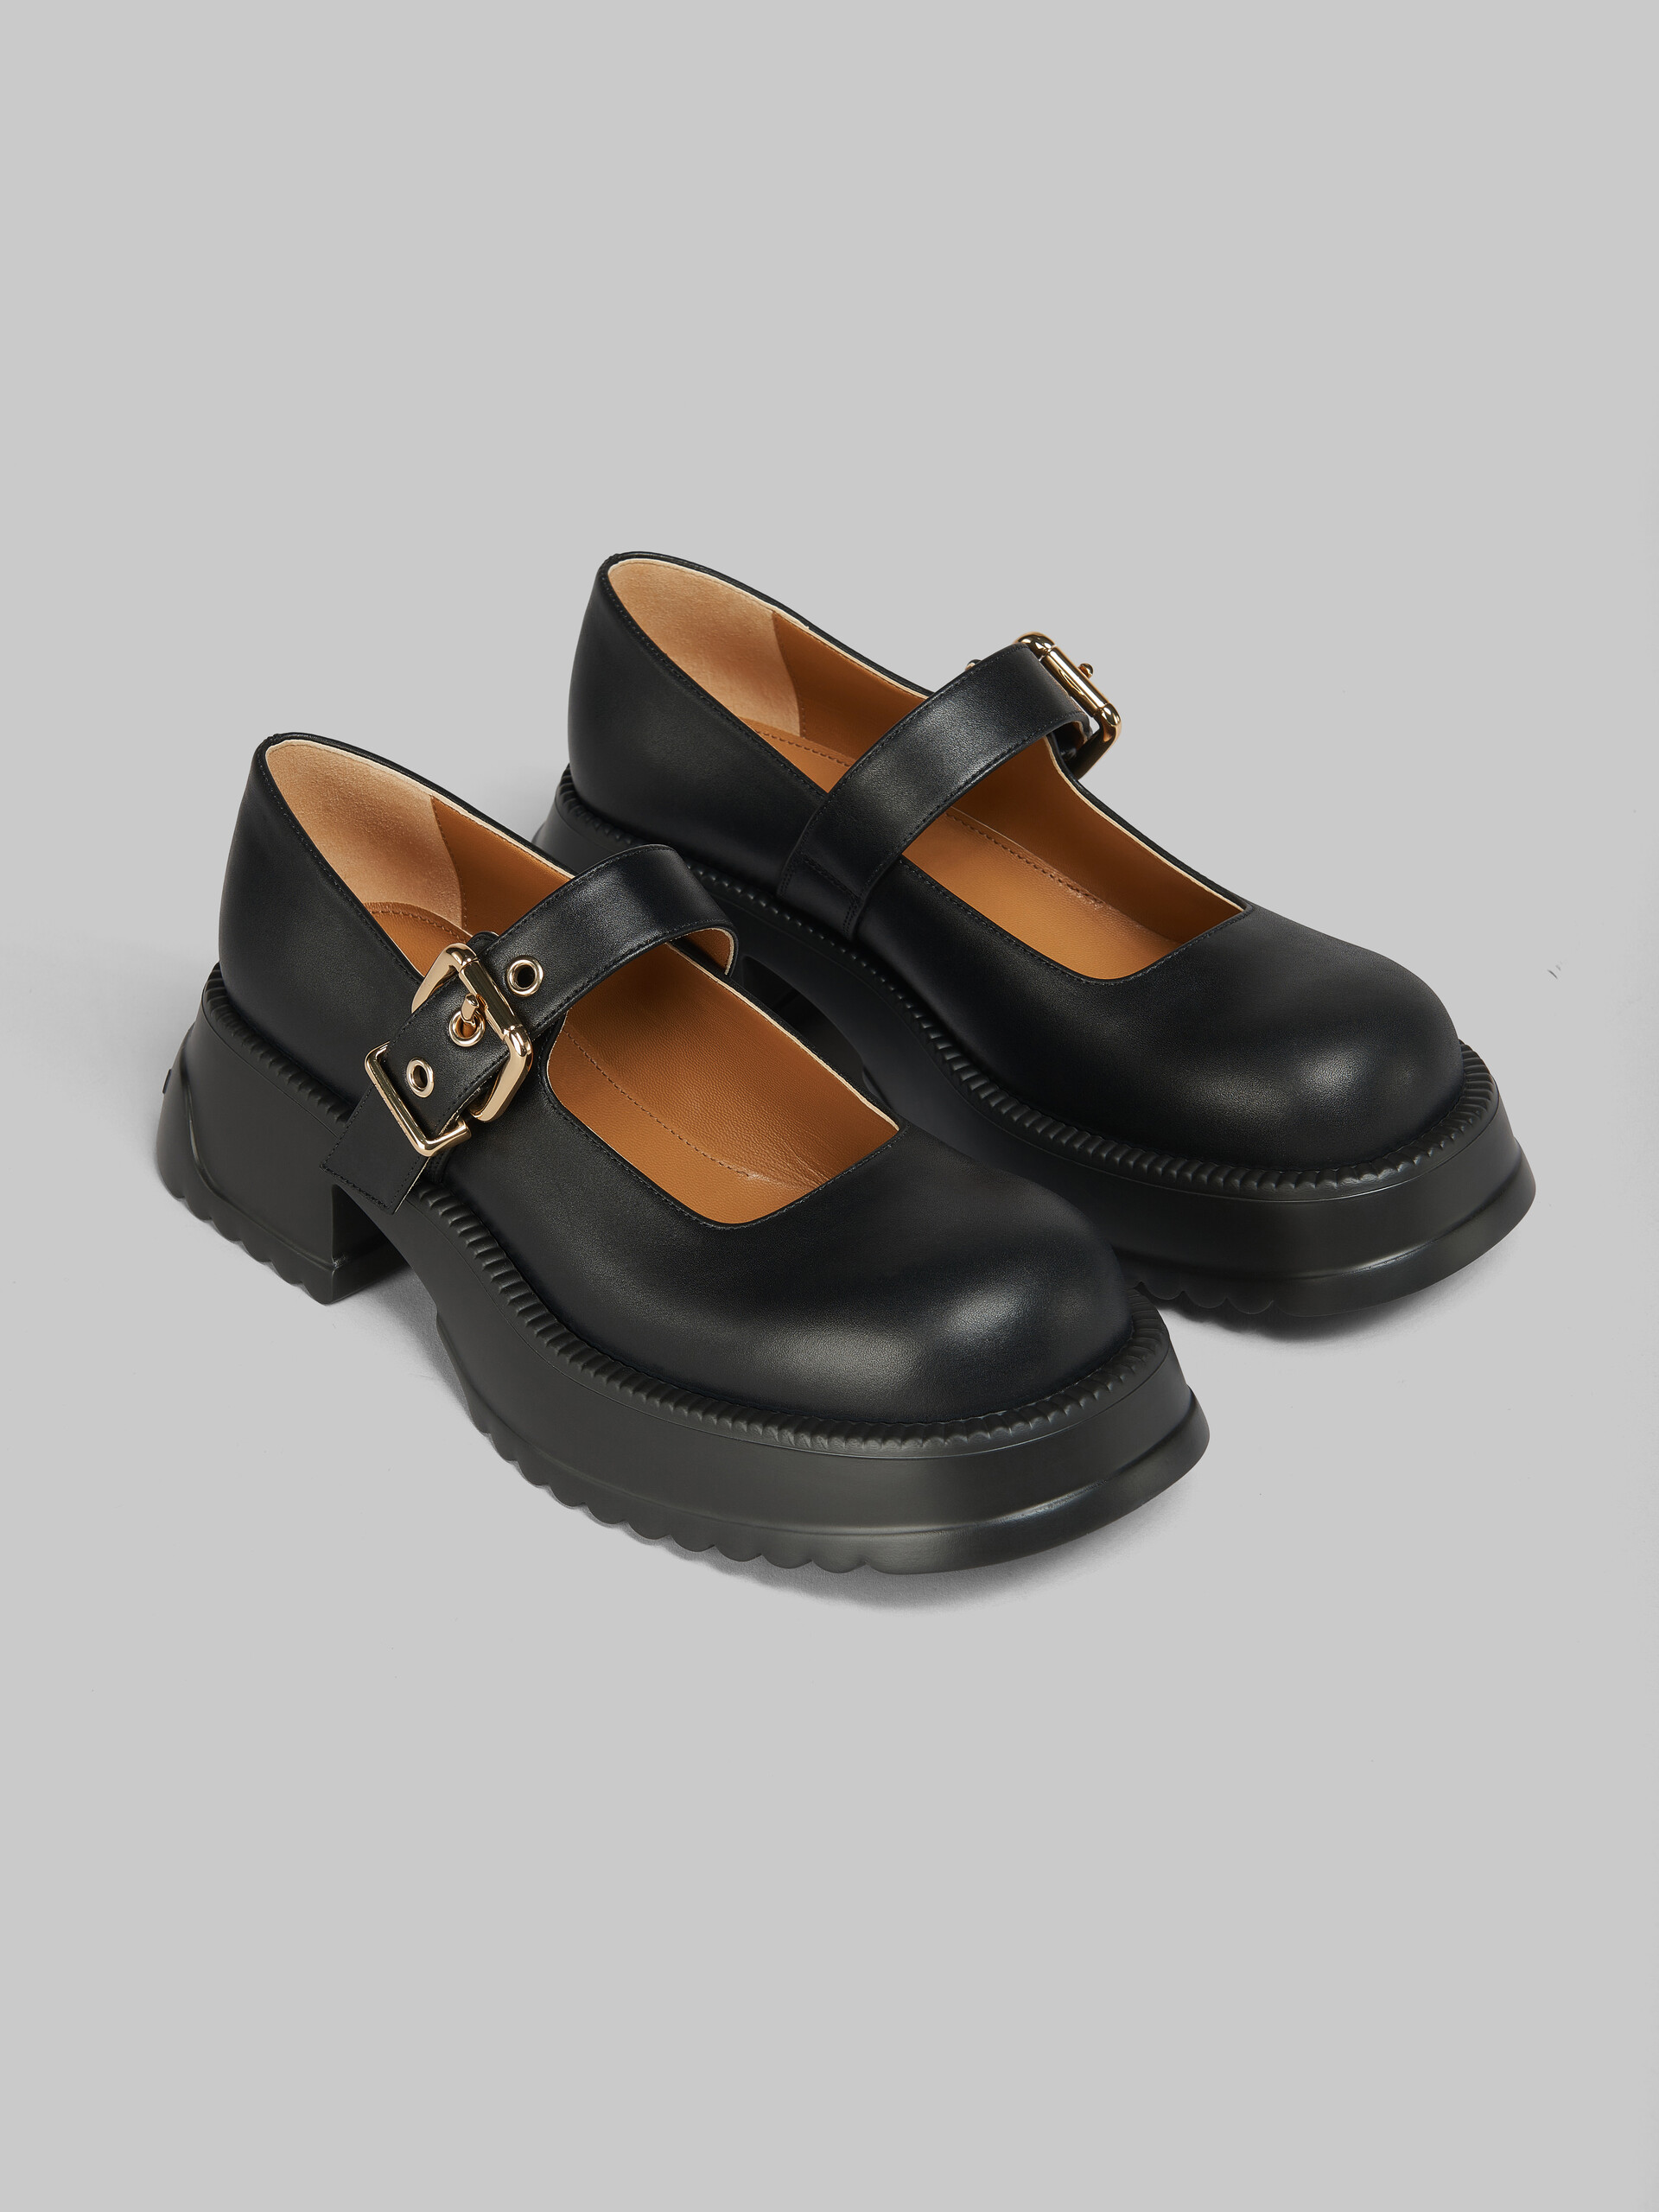 Black leather Mary Jane with platform sole - Sneakers - Image 5